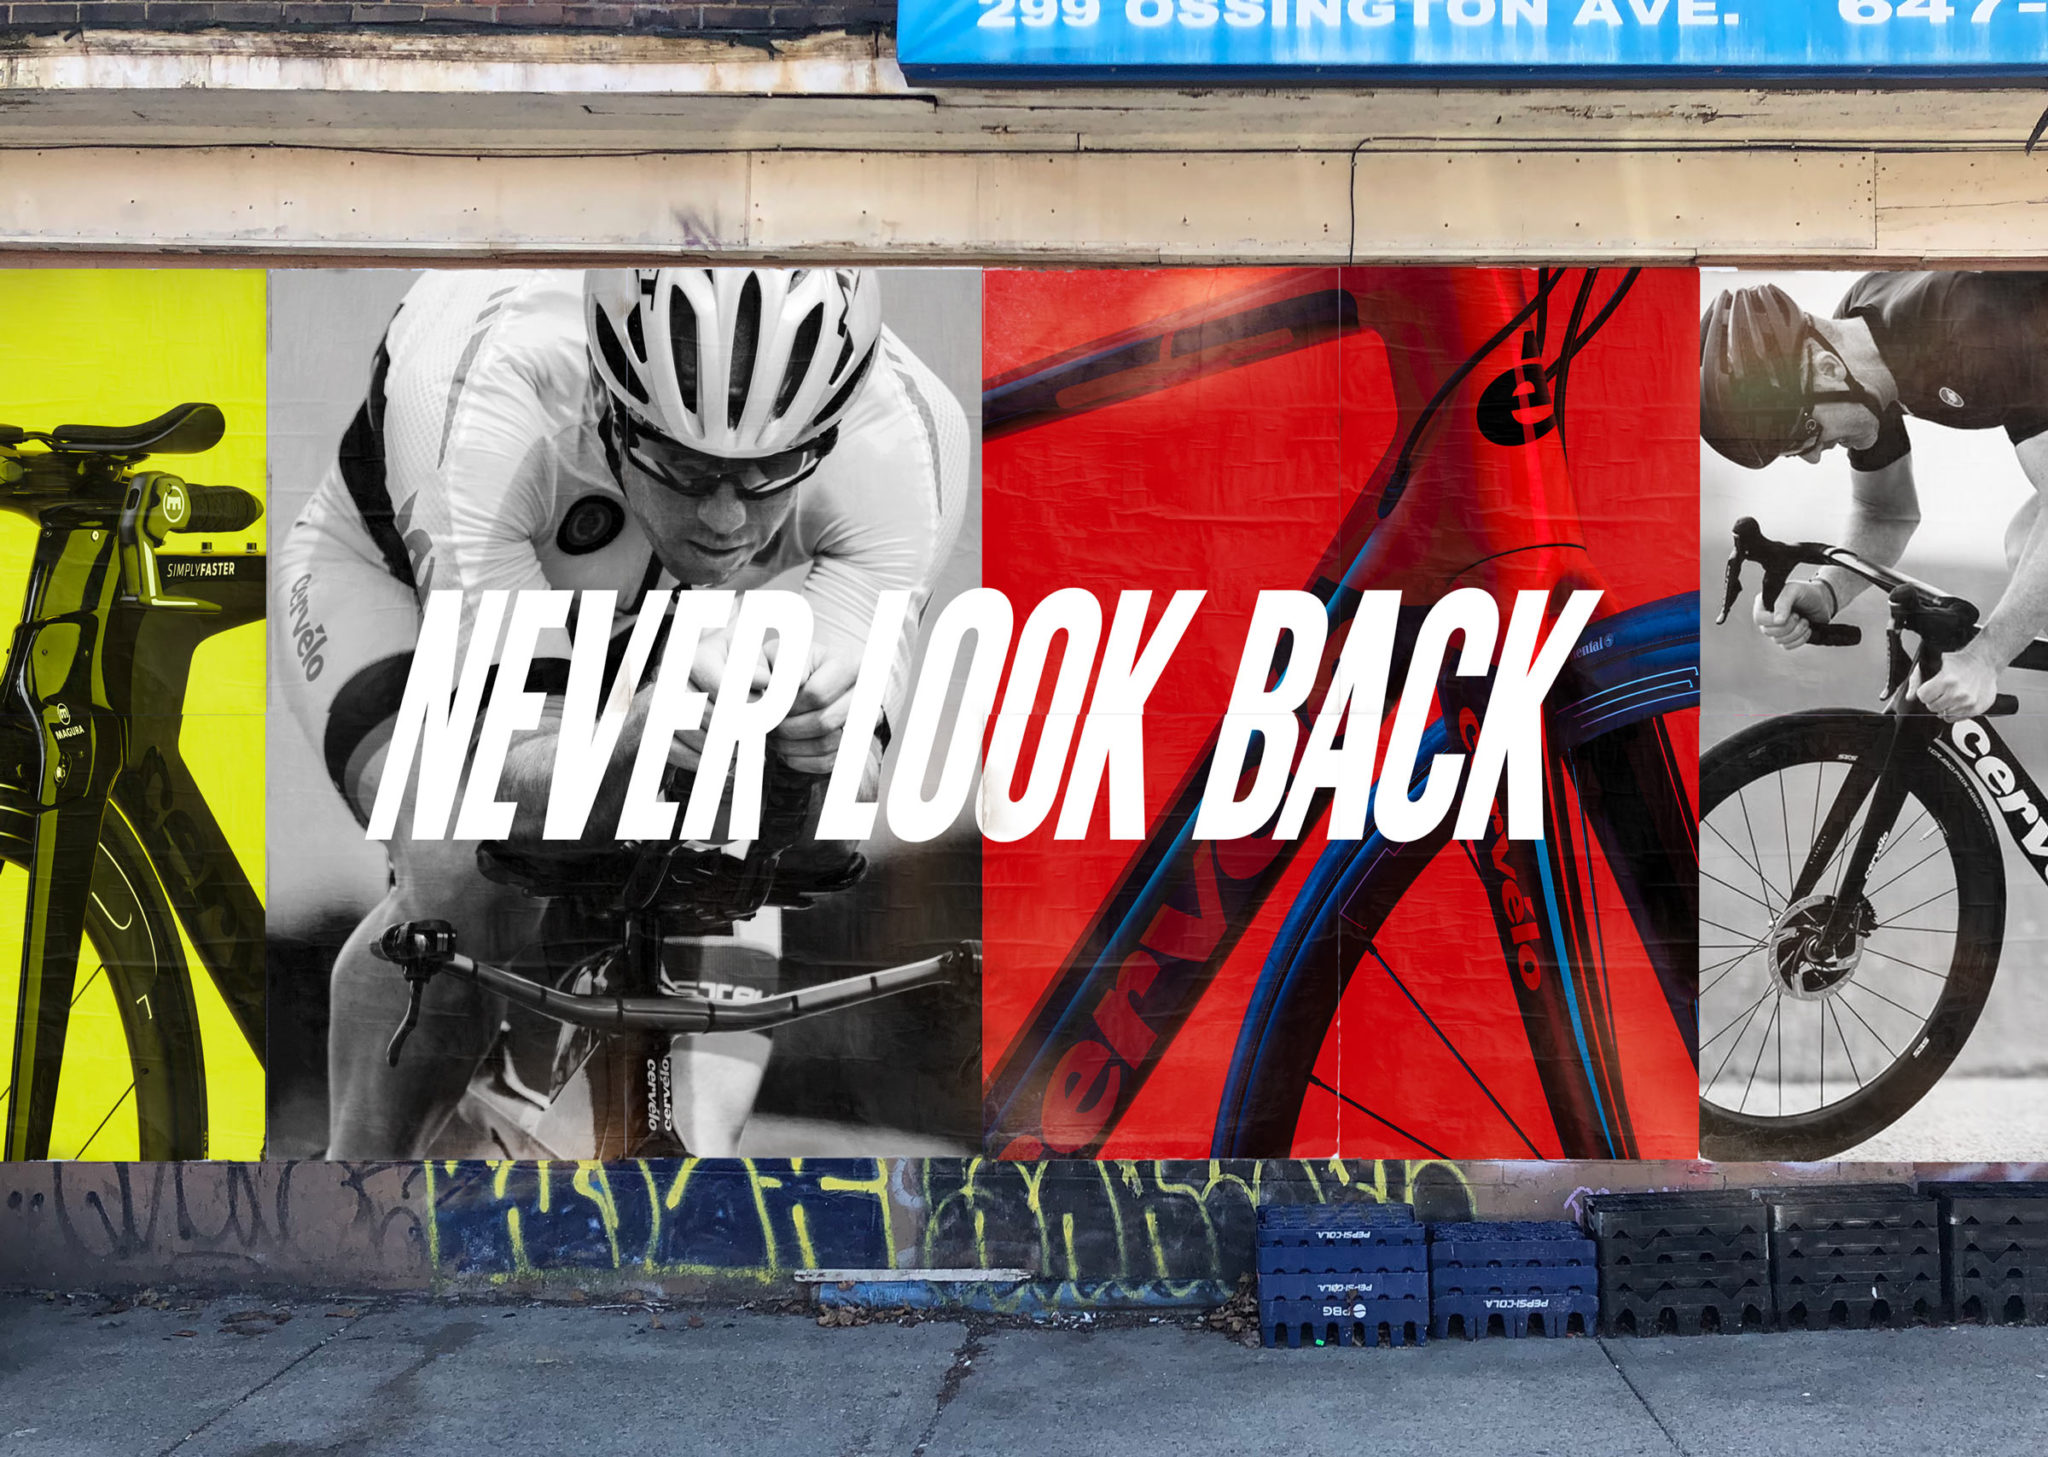 Cervelo posters with Never Look Back tagline